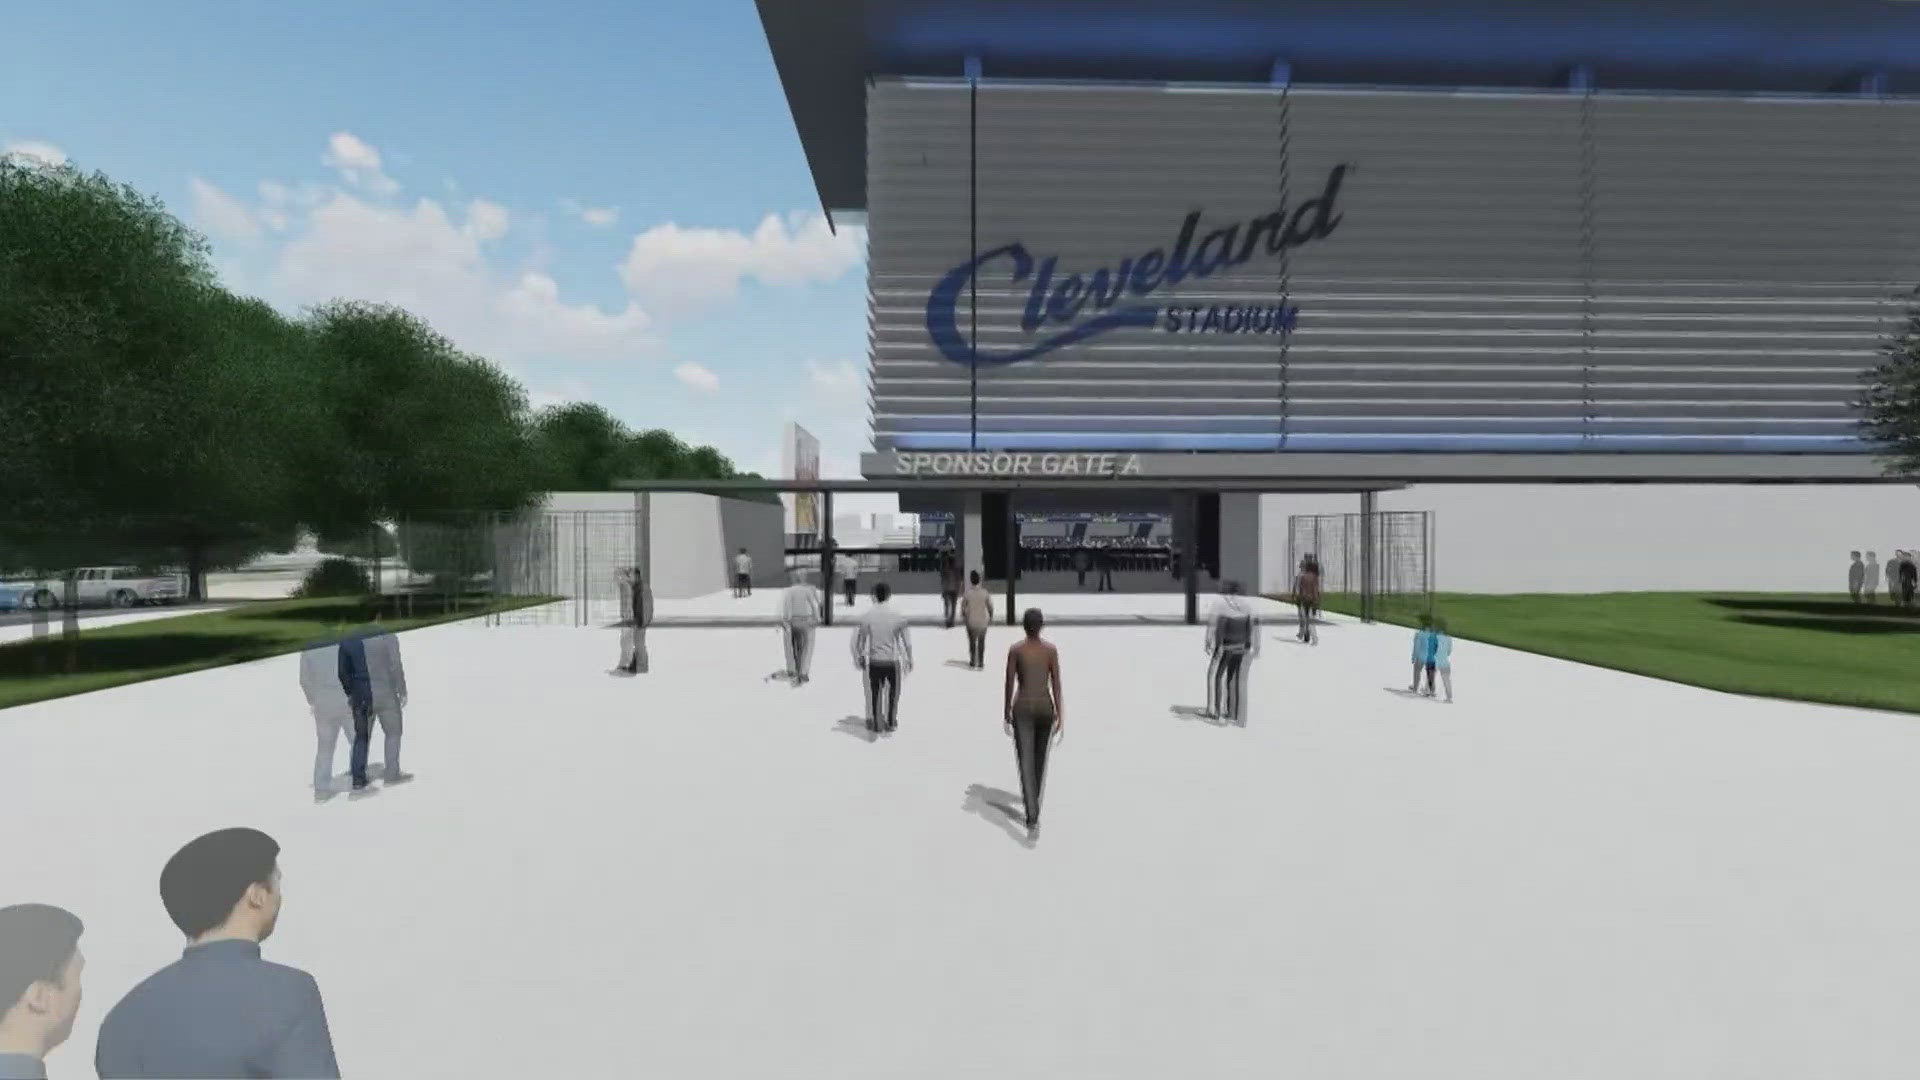 Cleveland Soccer Group hopes its South Gateway stadium will host NWSL and MLS Next Pro soccer matches, local college and high school games, concerts, and festivals.